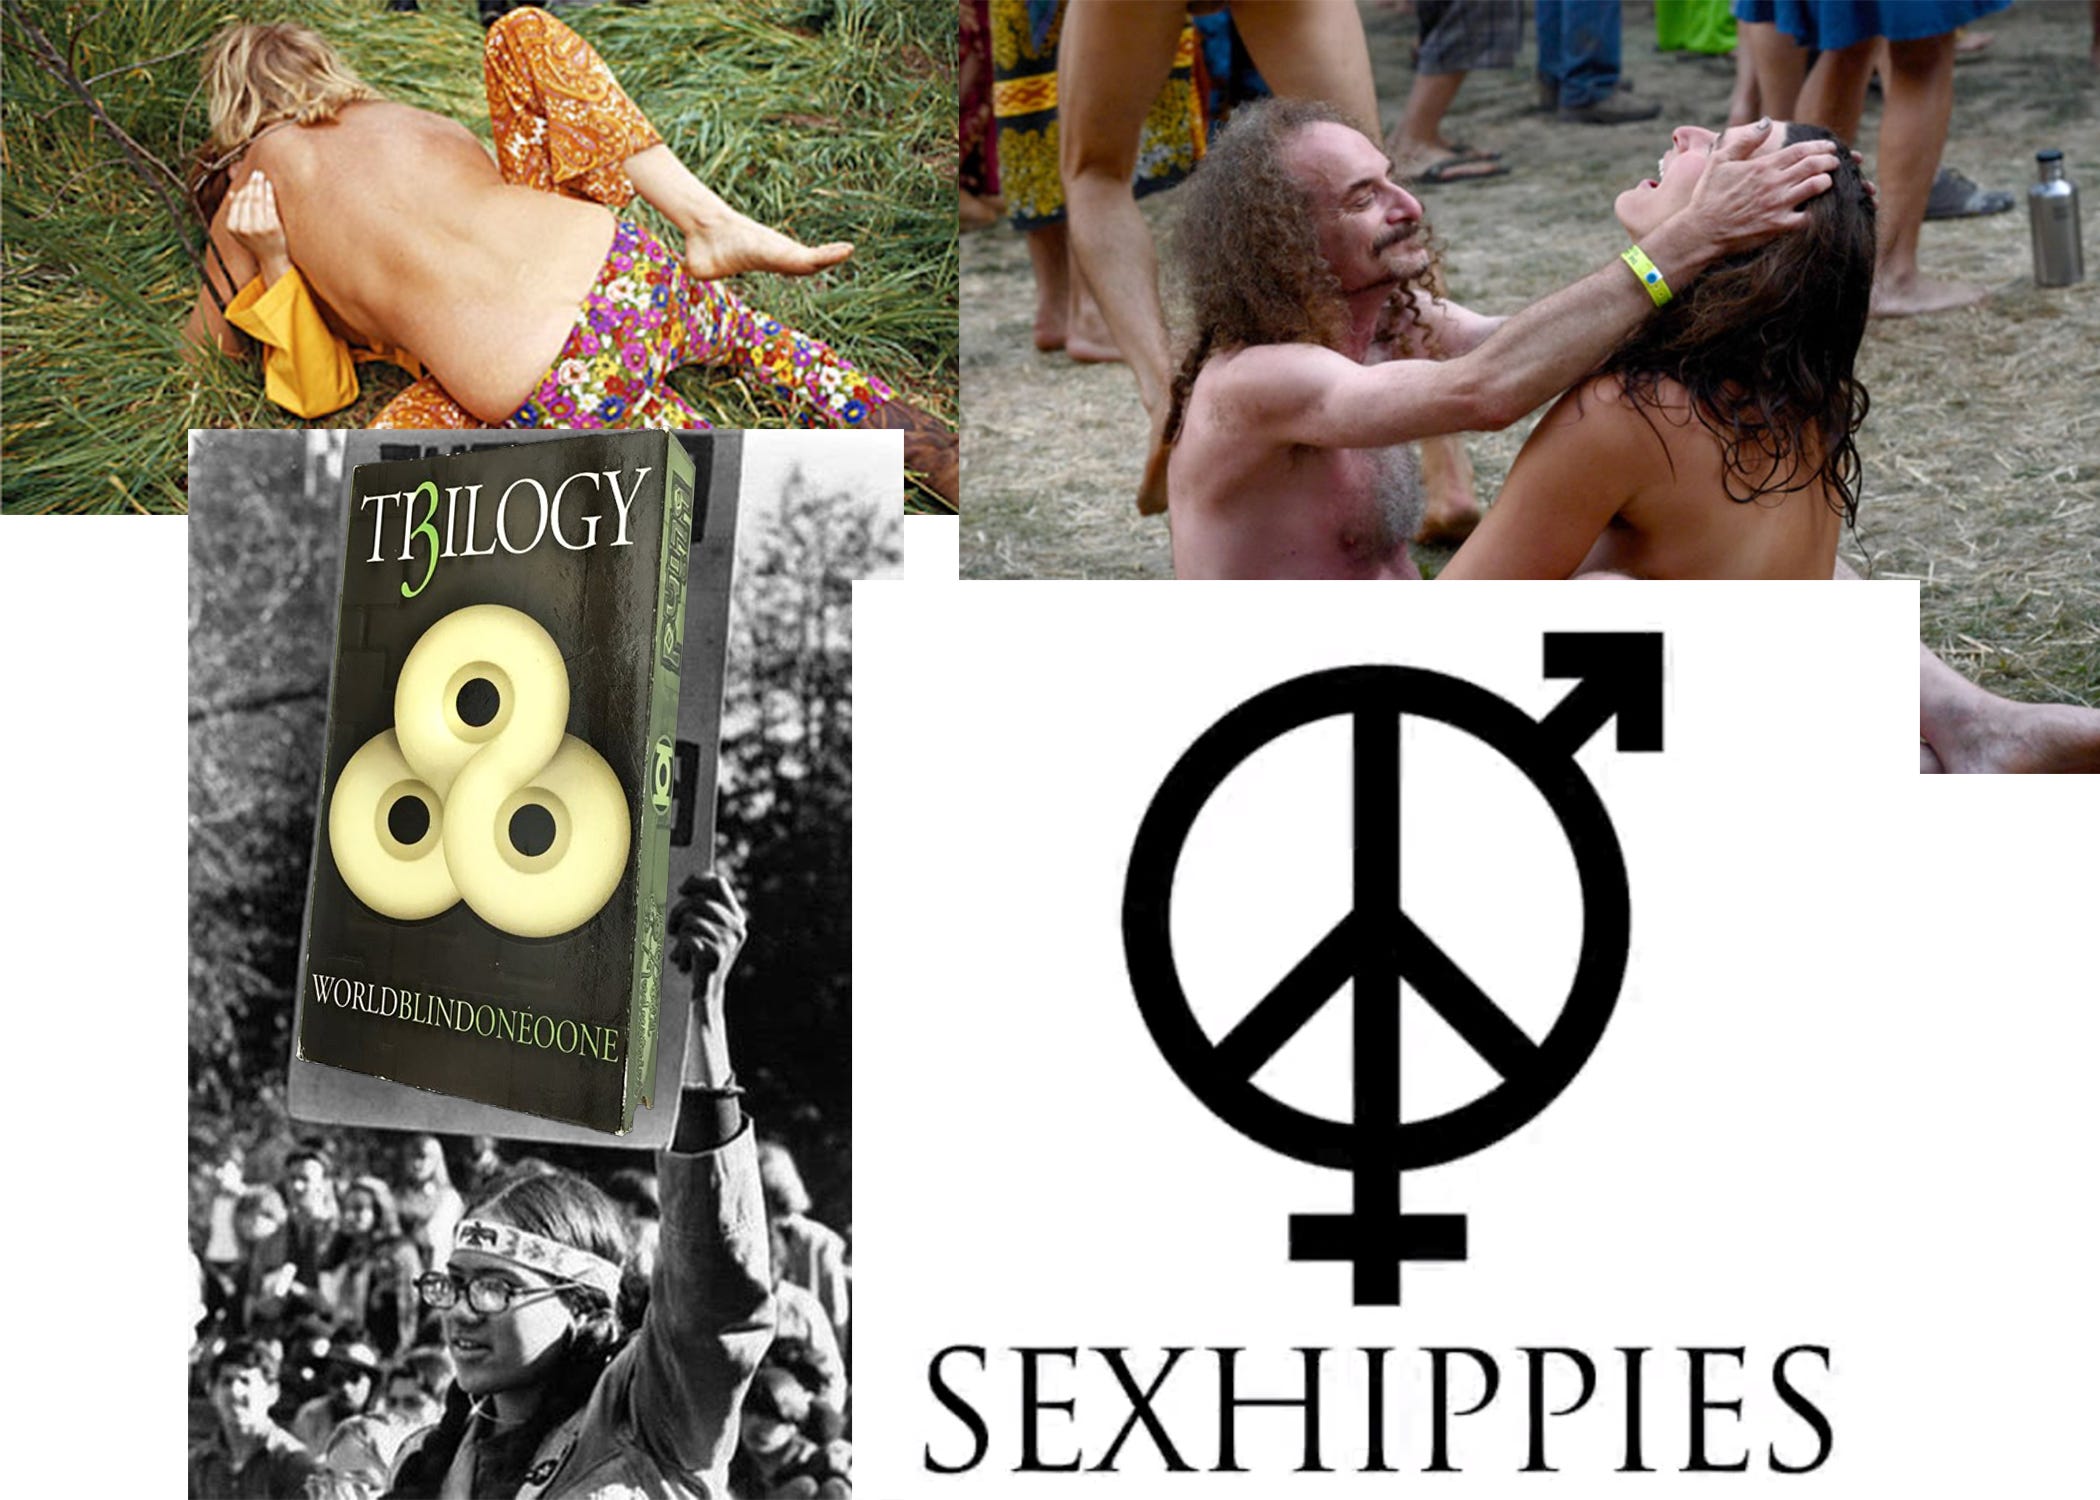 Who Are The Sex Hippies? - by Wes - Skatelier